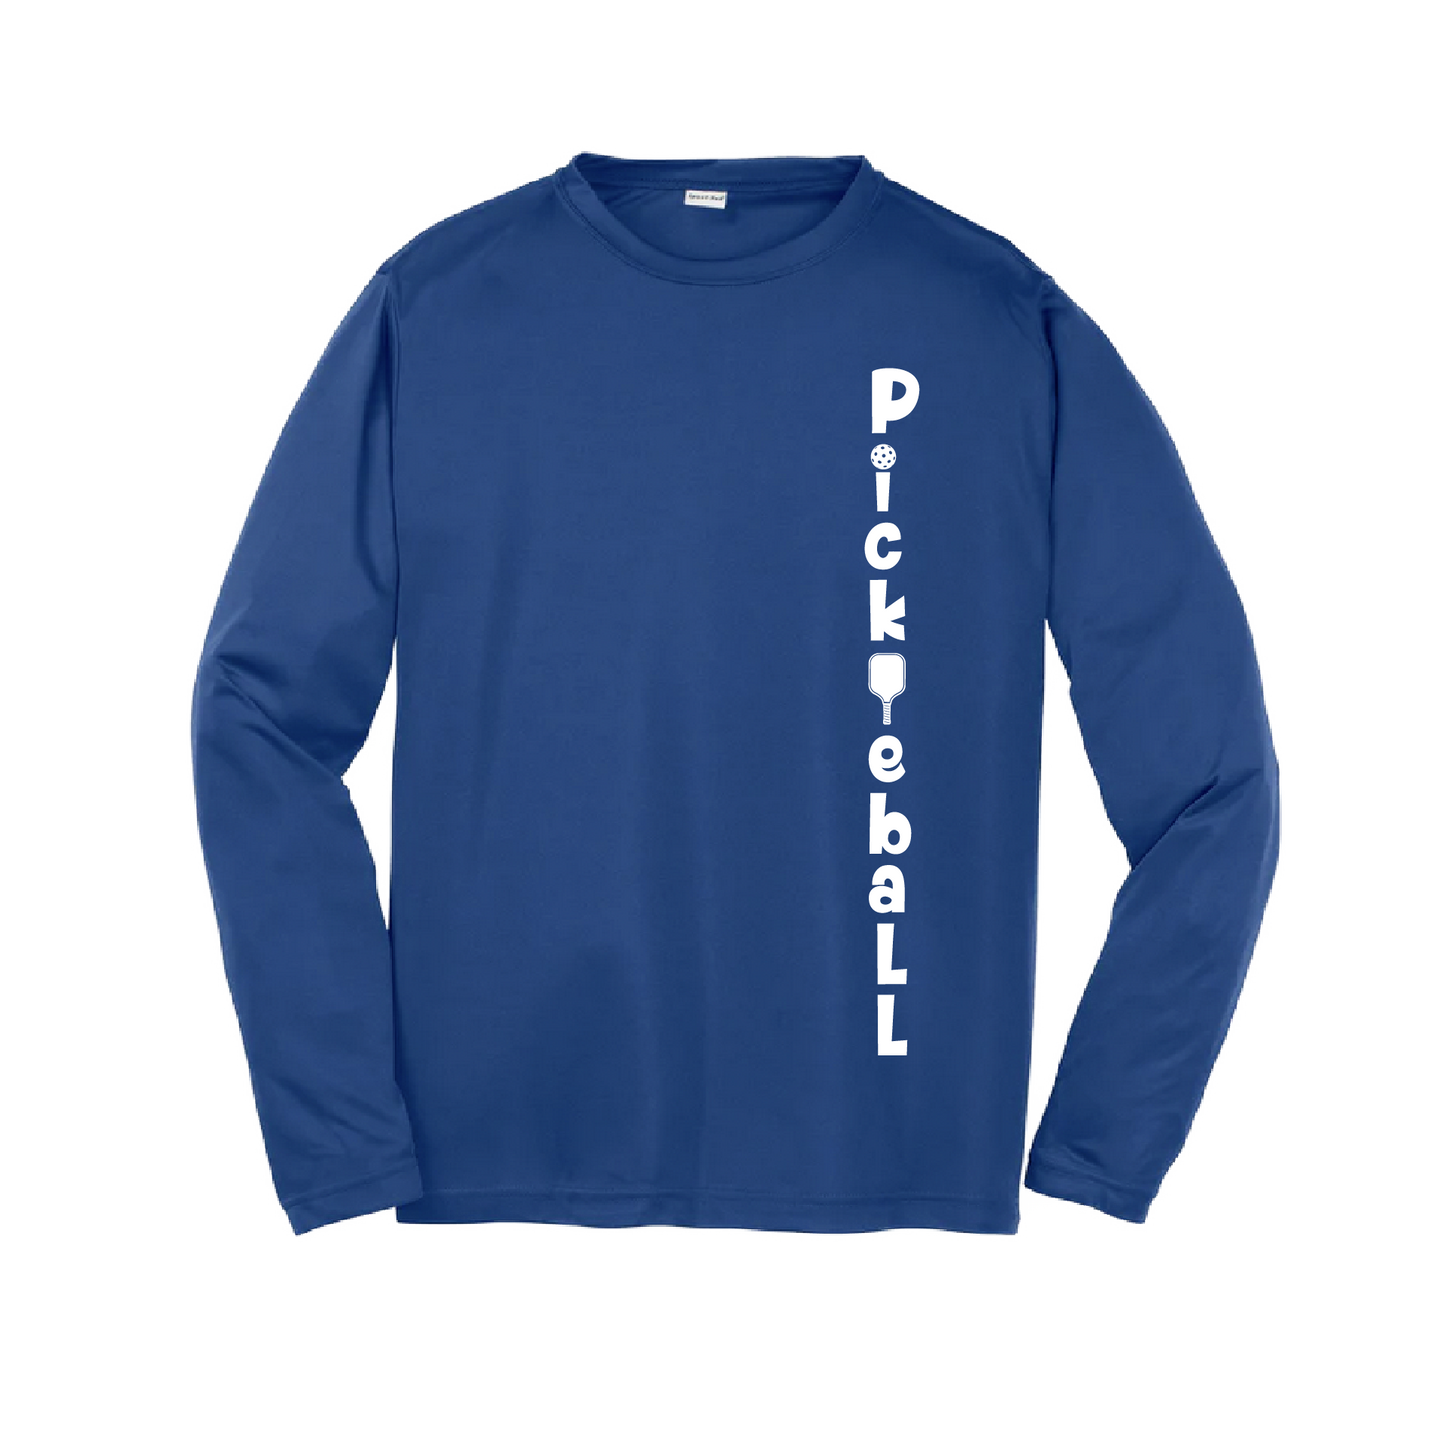 Pickleball Design: Pickleball Vertical - Customizable location  Youth Styles: Long Sleeve  Shirts are lightweight, roomy and highly breathable. These moisture-wicking shirts are designed for athletic performance. They feature PosiCharge technology to lock in color and prevent logos from fading. Removable tag and set-in sleeves for comfort.